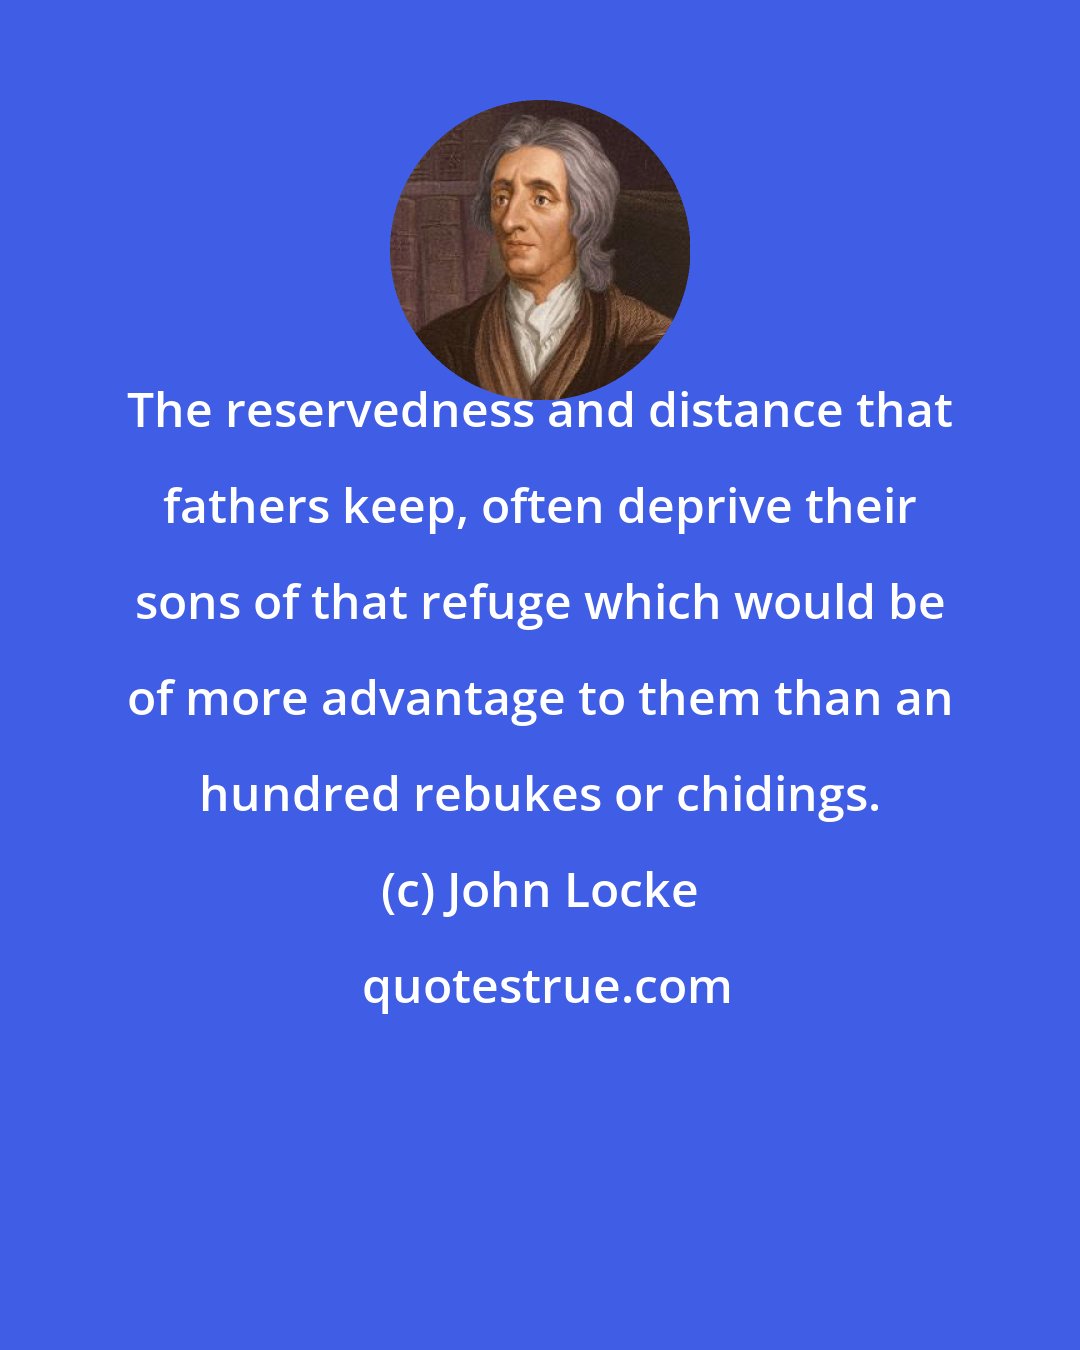 John Locke: The reservedness and distance that fathers keep, often deprive their sons of that refuge which would be of more advantage to them than an hundred rebukes or chidings.